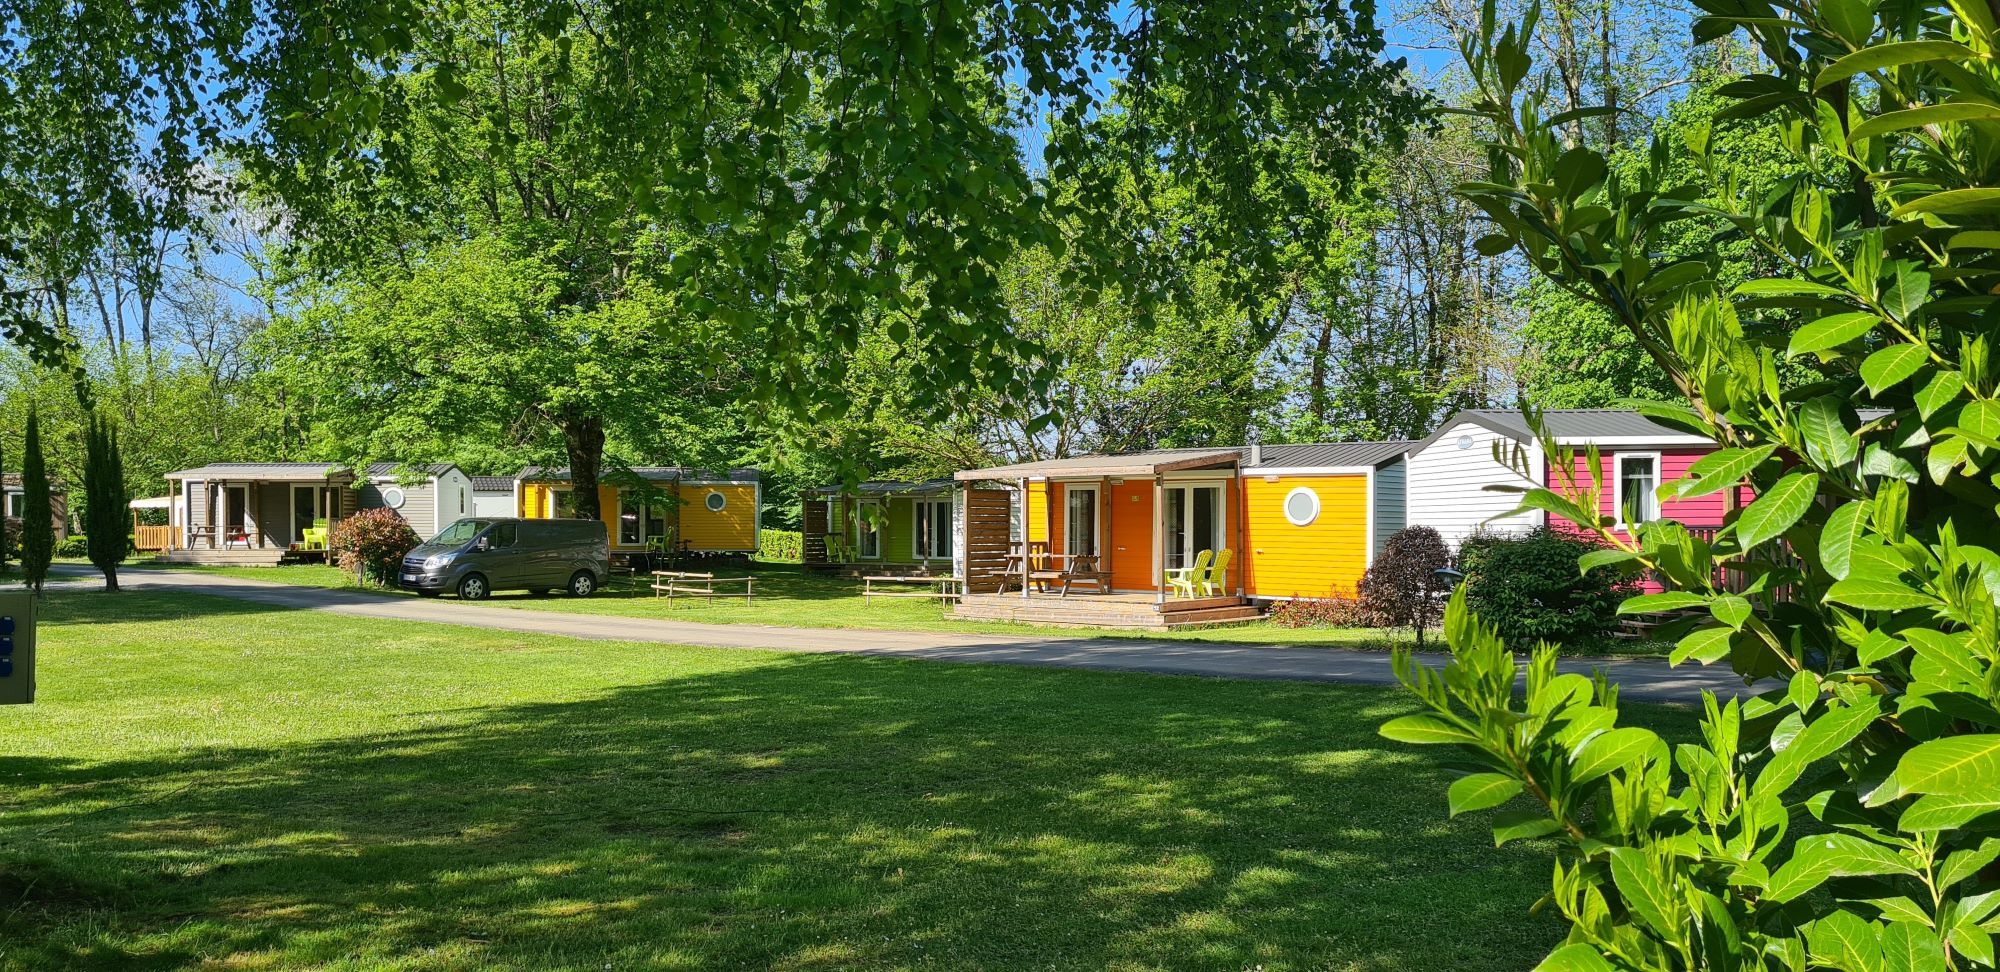 Rental Mobilhome, Cottages and Chalets in Lourdes